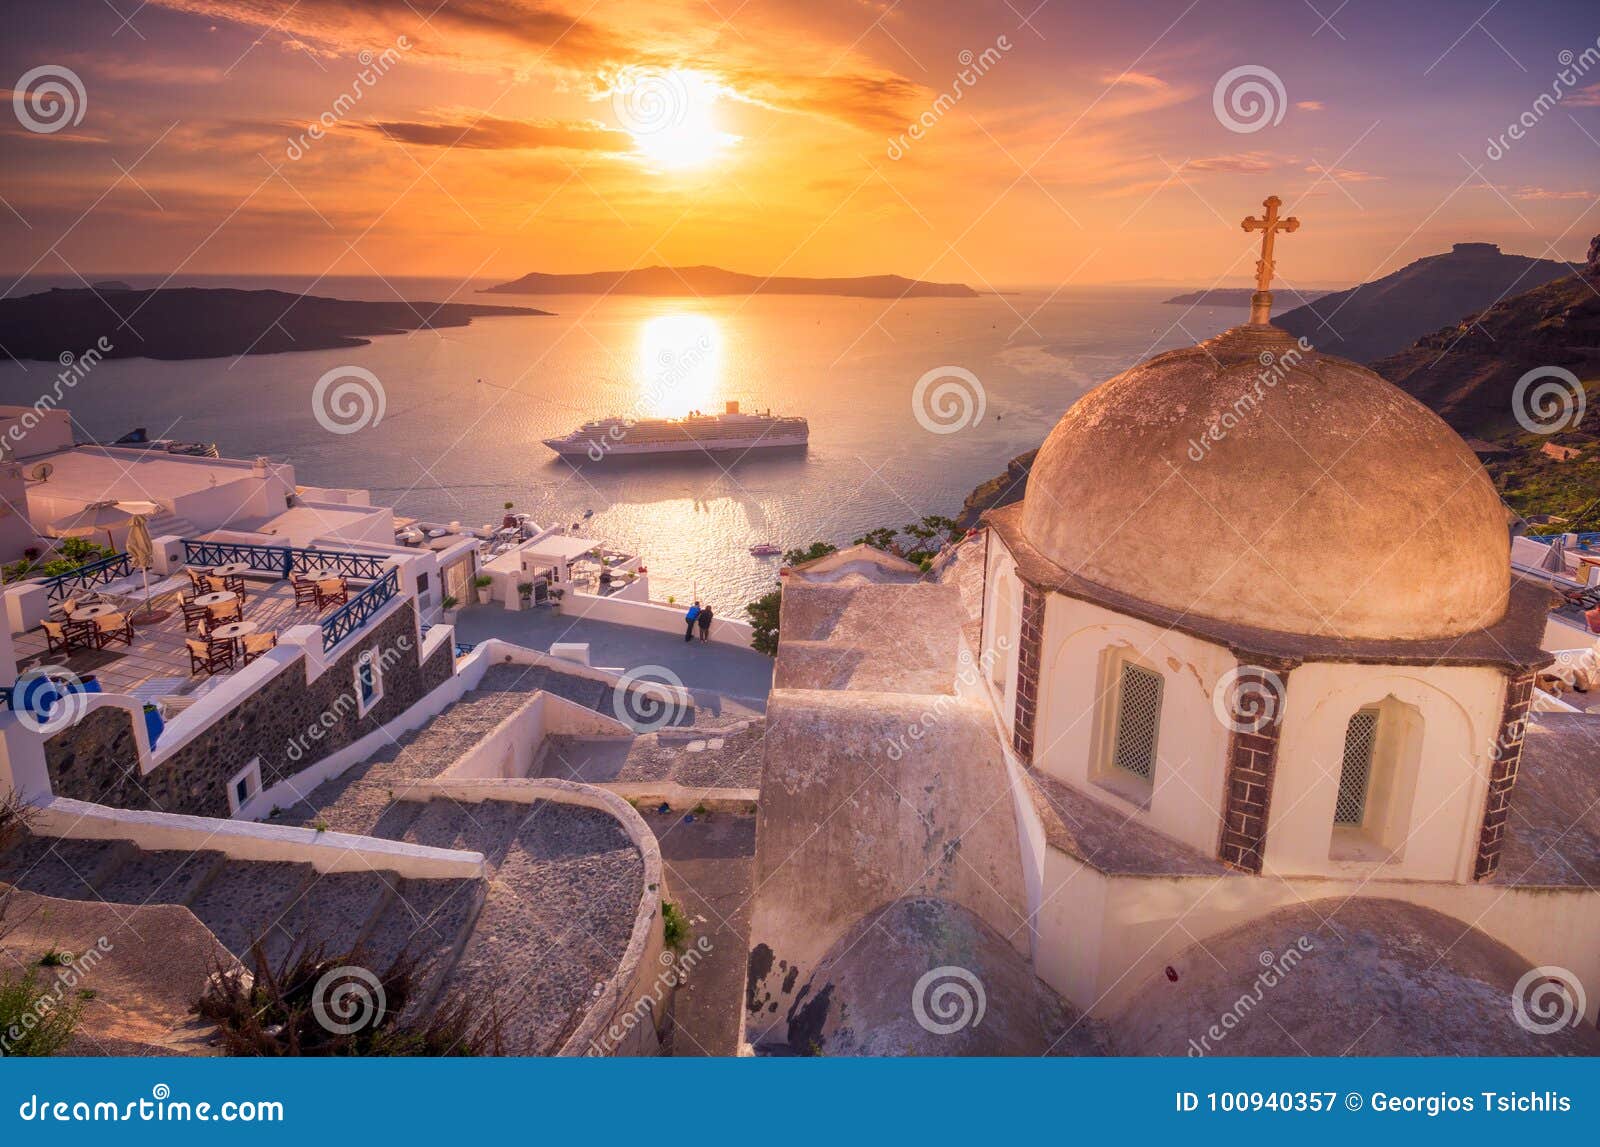 amazing evening view of fira, caldera, volcano of santorini, greece with cruise ships at sunset.